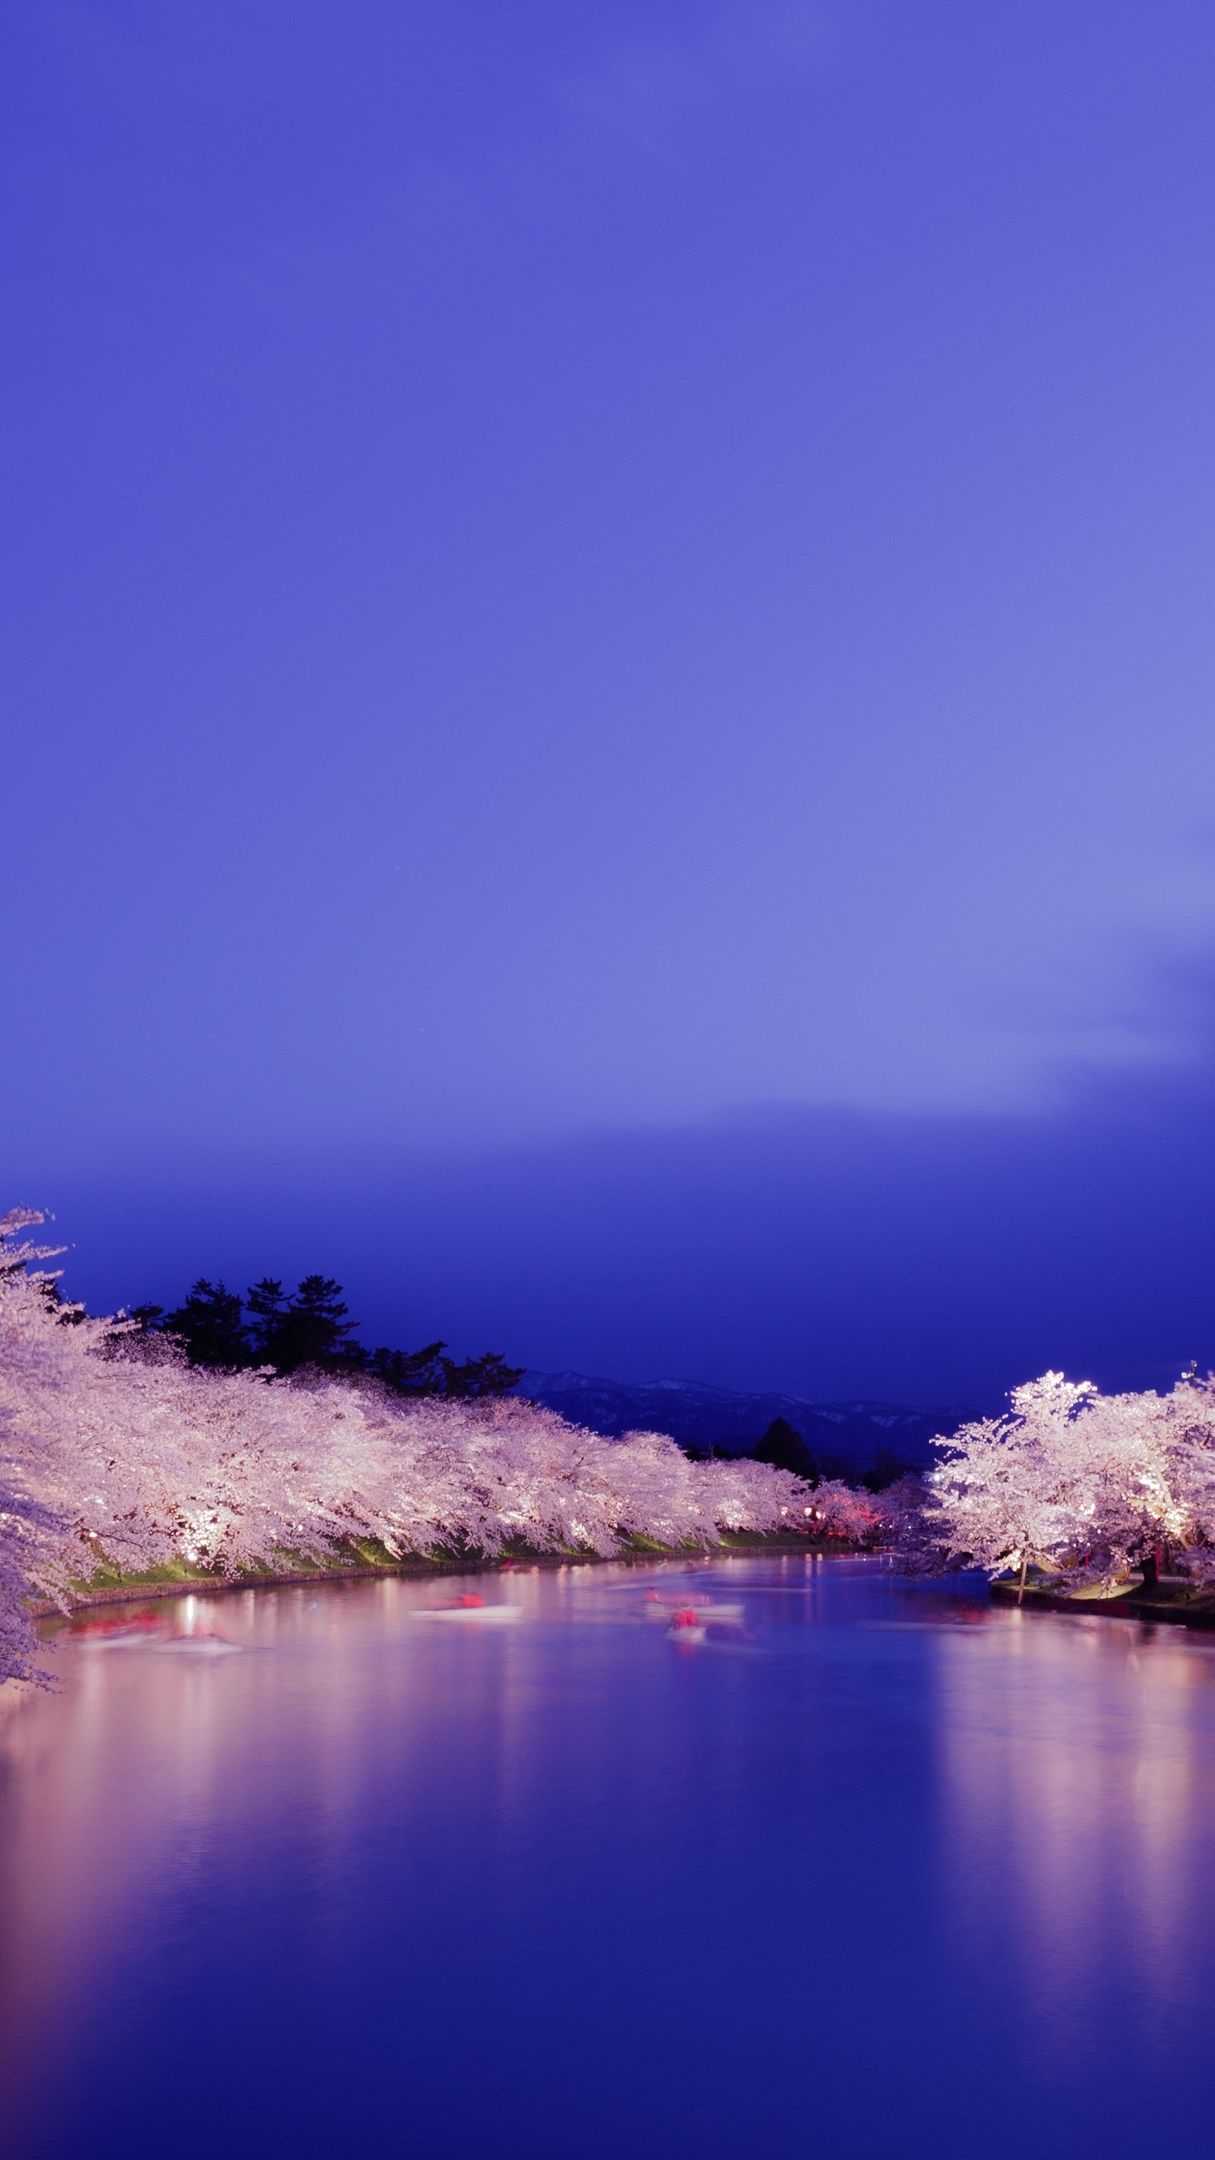 Cherry blossom at night wallpaper - backiee